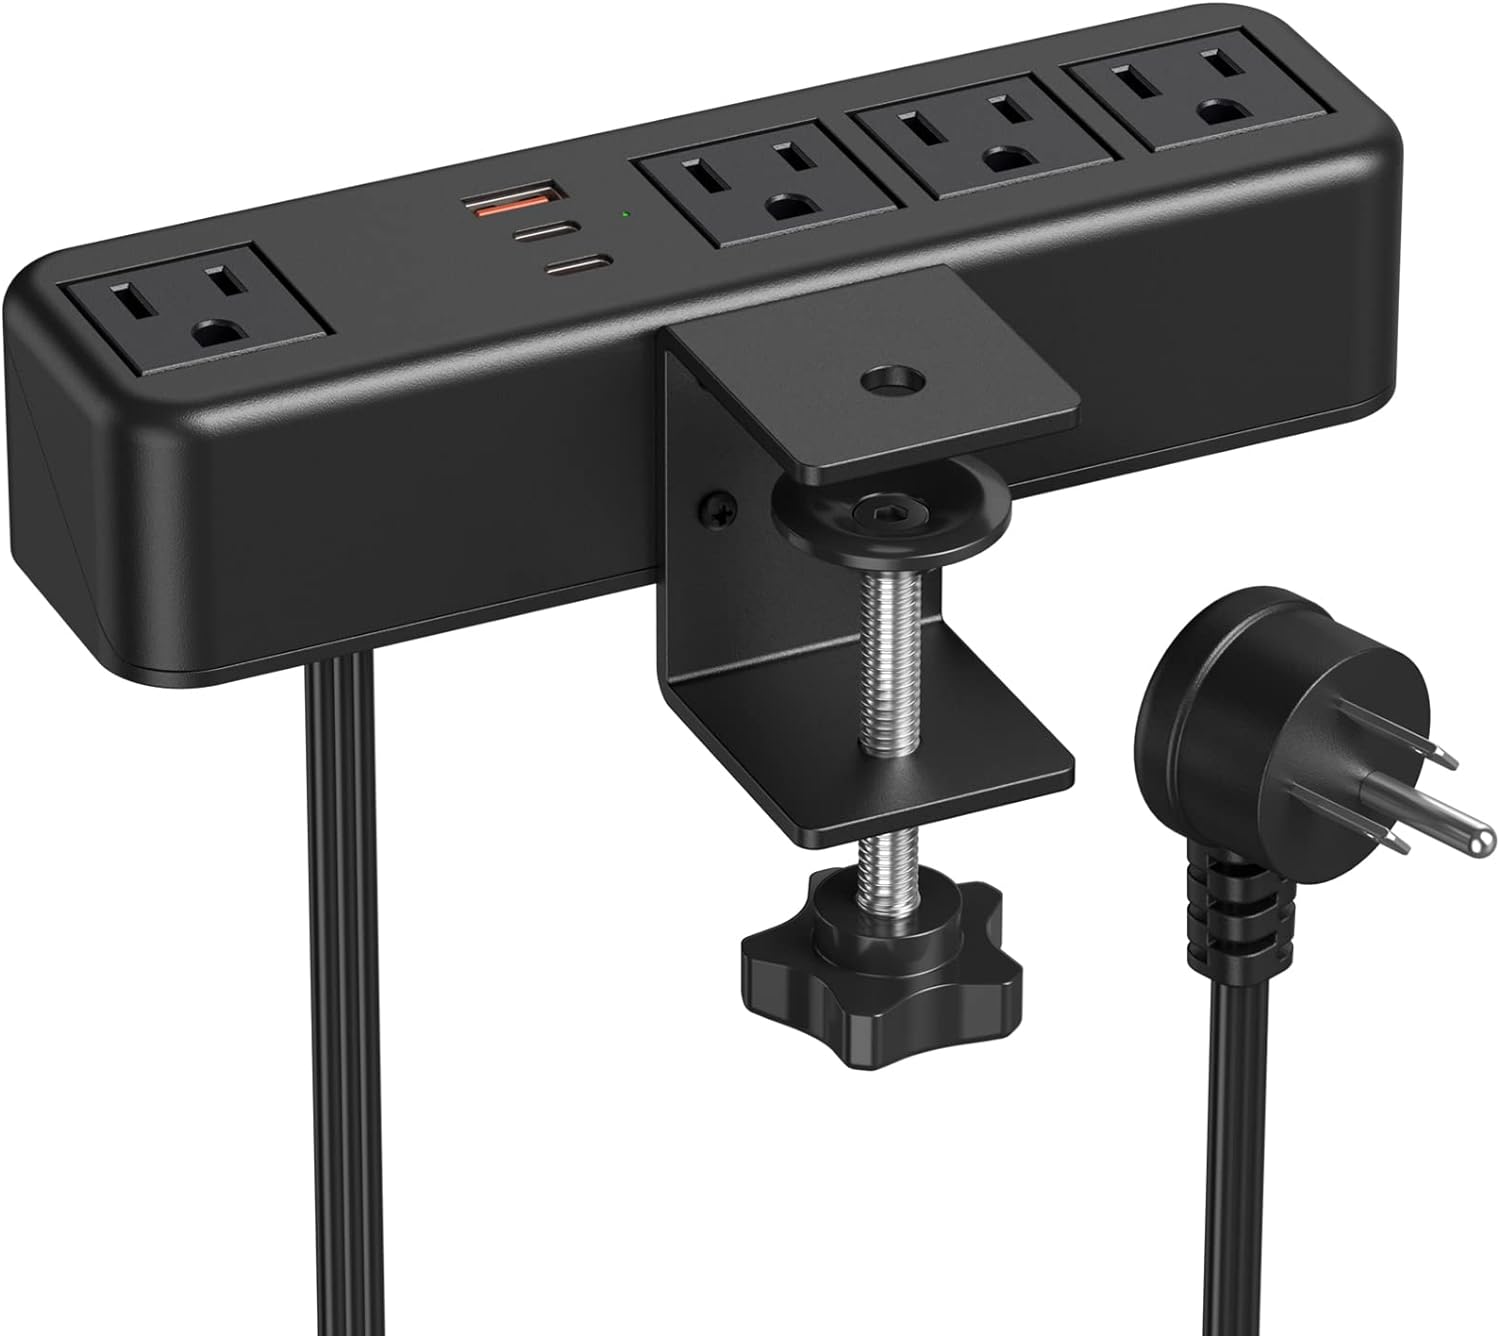 CCCEI 45W USB C Desk Side Clamp Power Strip, Desk Top Tube Edge Clamp Mount Outlet with 4 Outlets, Widely Spaced Surge Protector Outlet Station, Fit 1.6 inch Tabletop Edge, Table Leg. 6 FT Power Cord